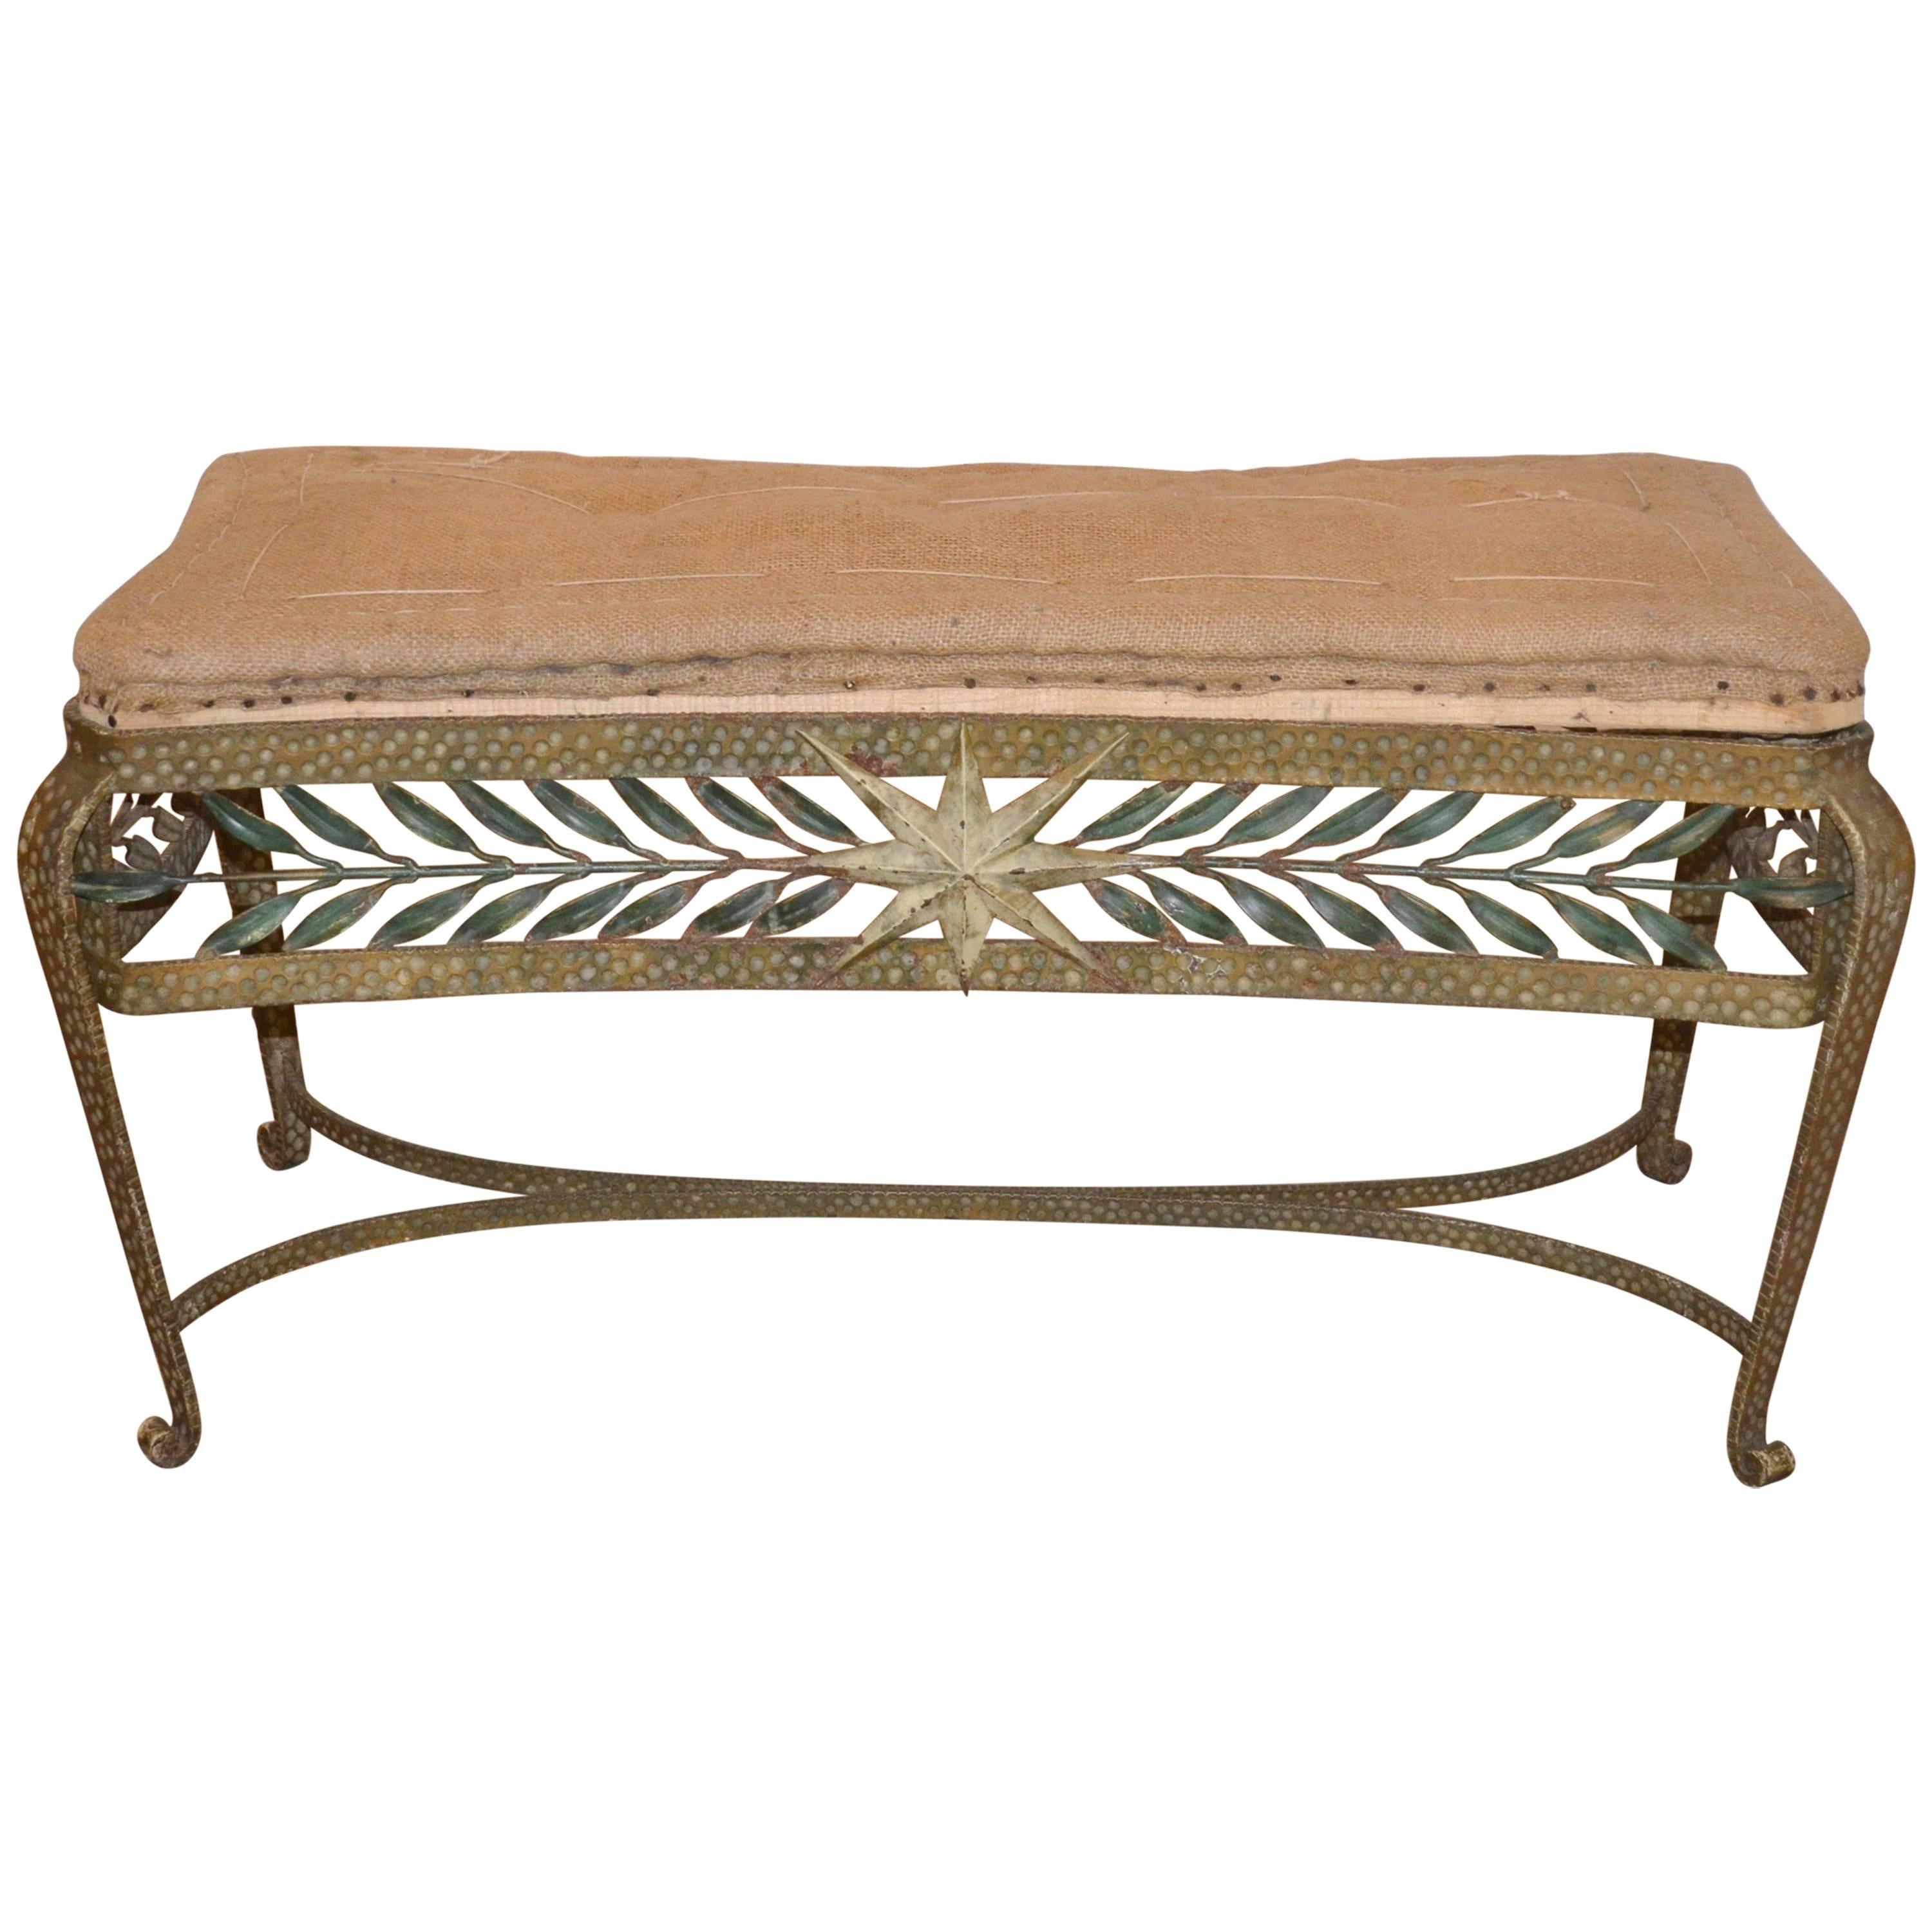 Forged and Gilt Bench, Pierluigi Colli for Cristal Art, Italy, 1950